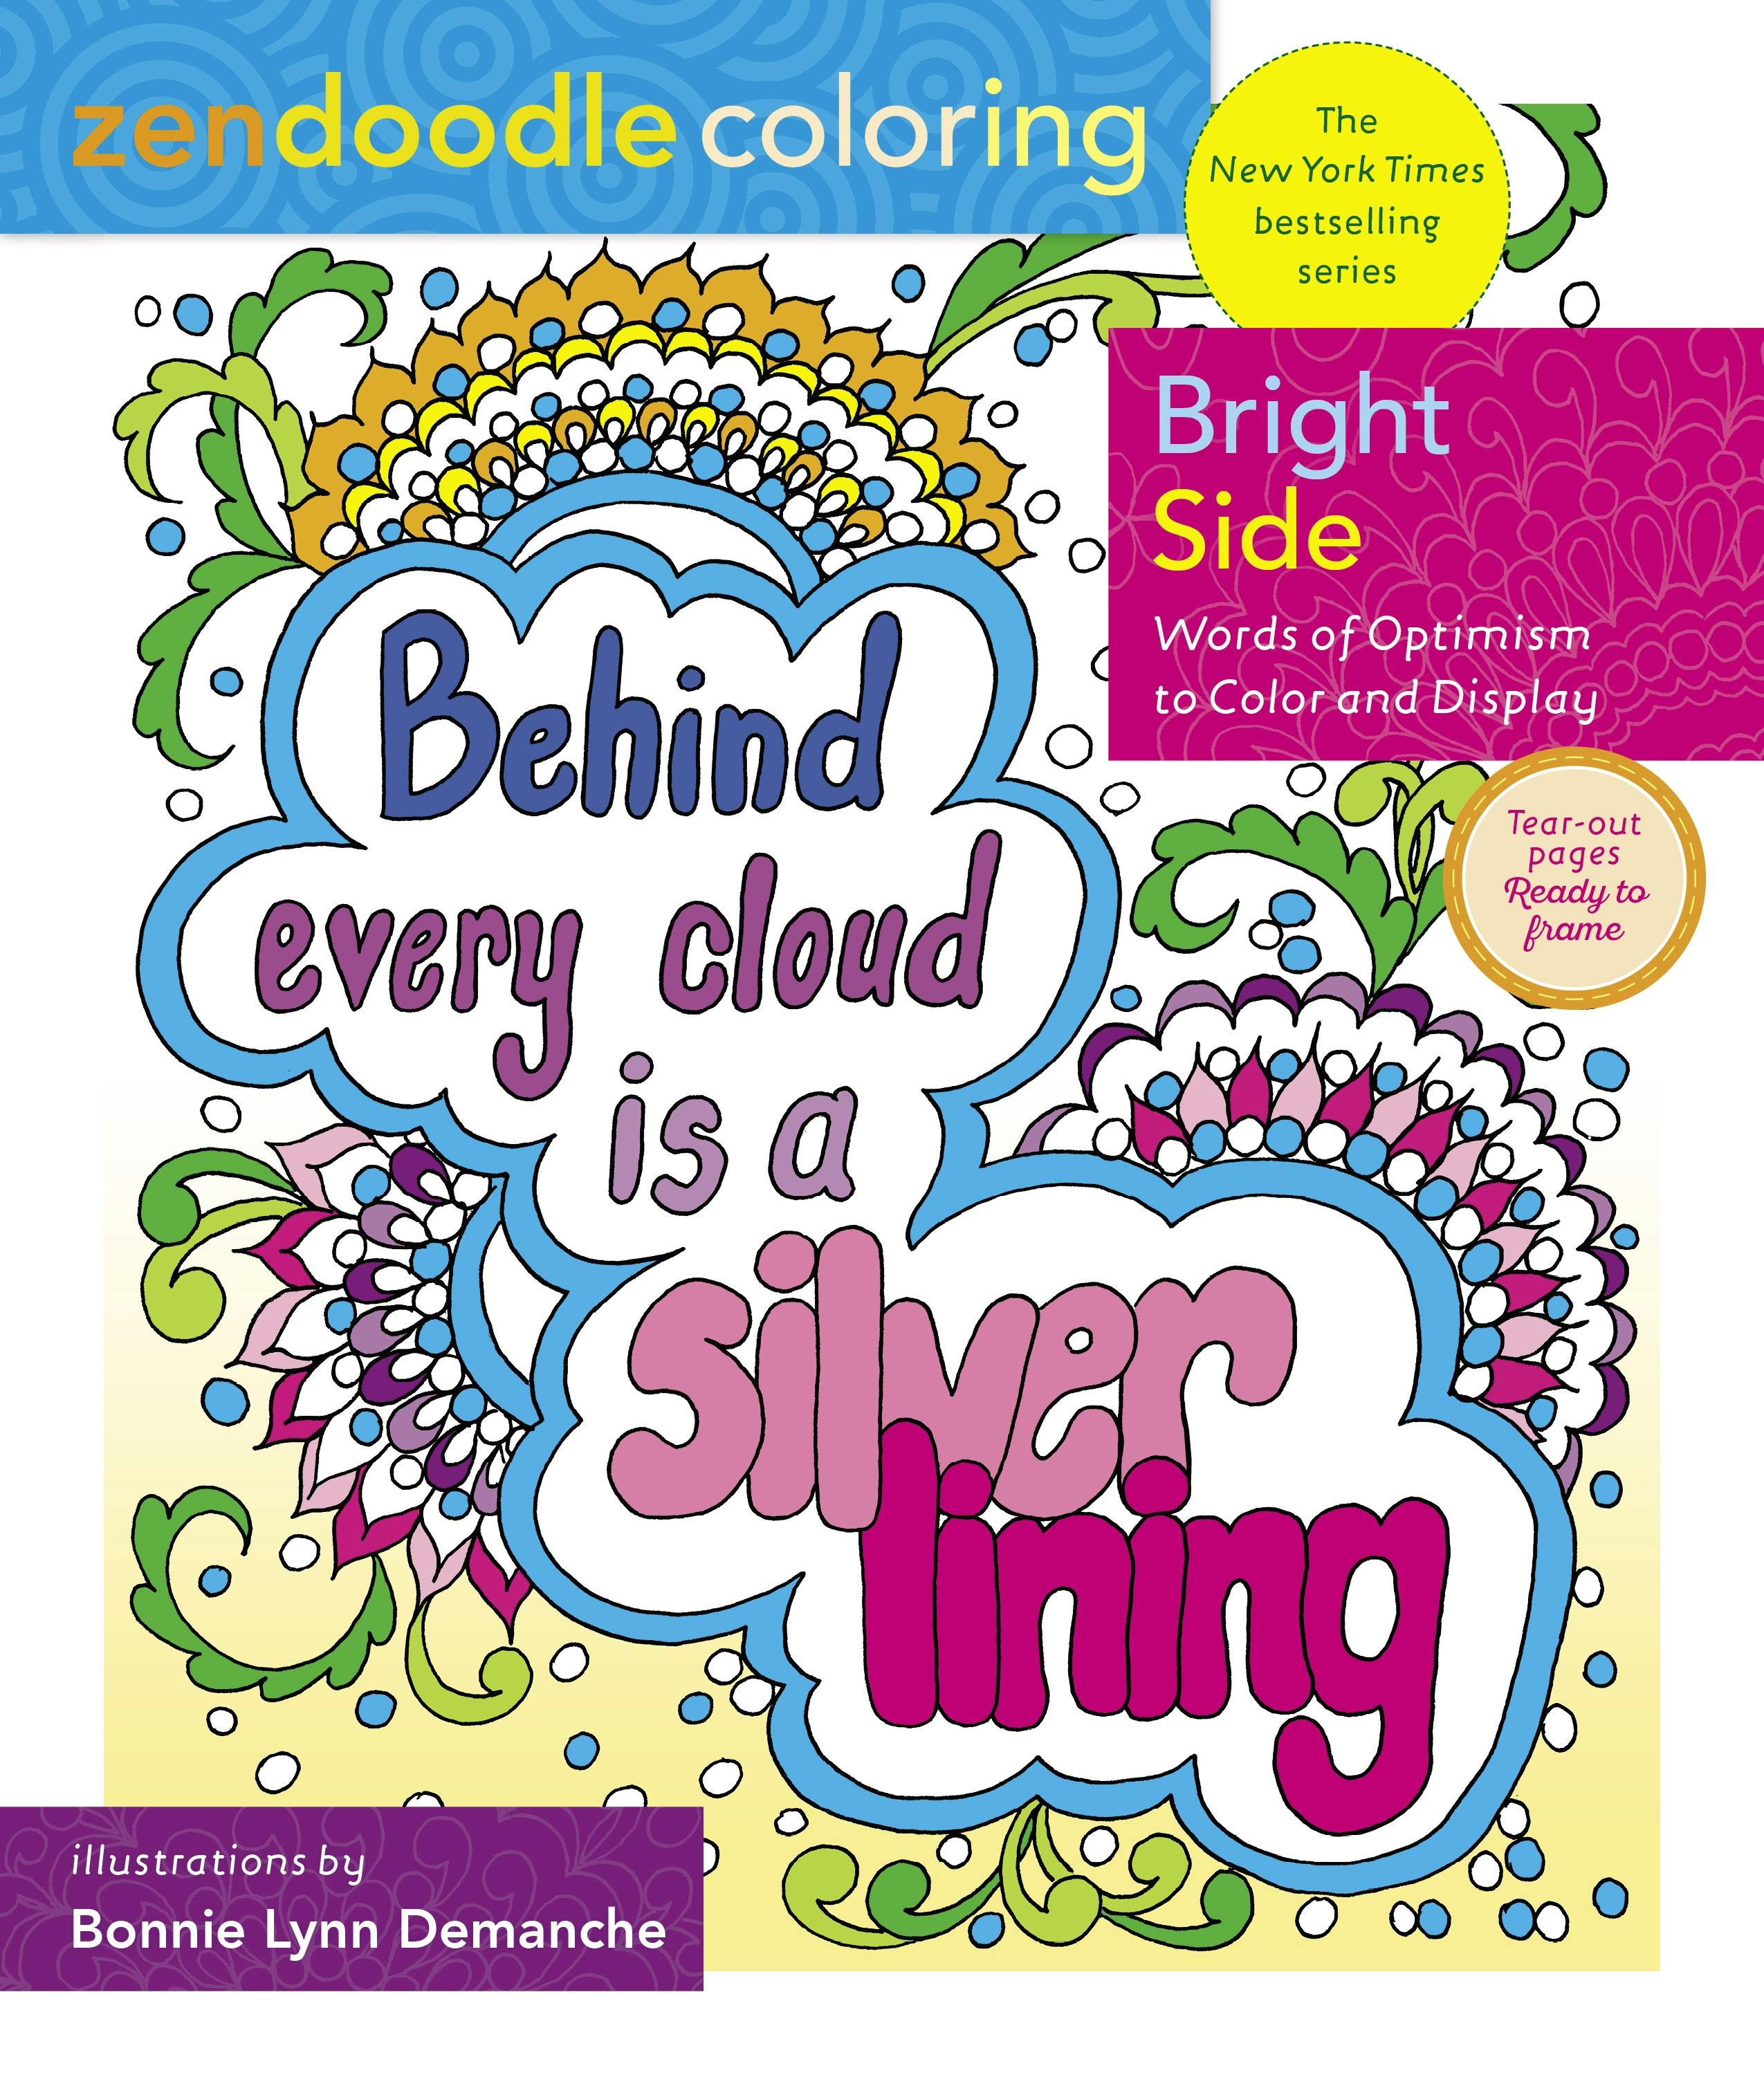 Image of Zendoodle Coloring: Bright Side